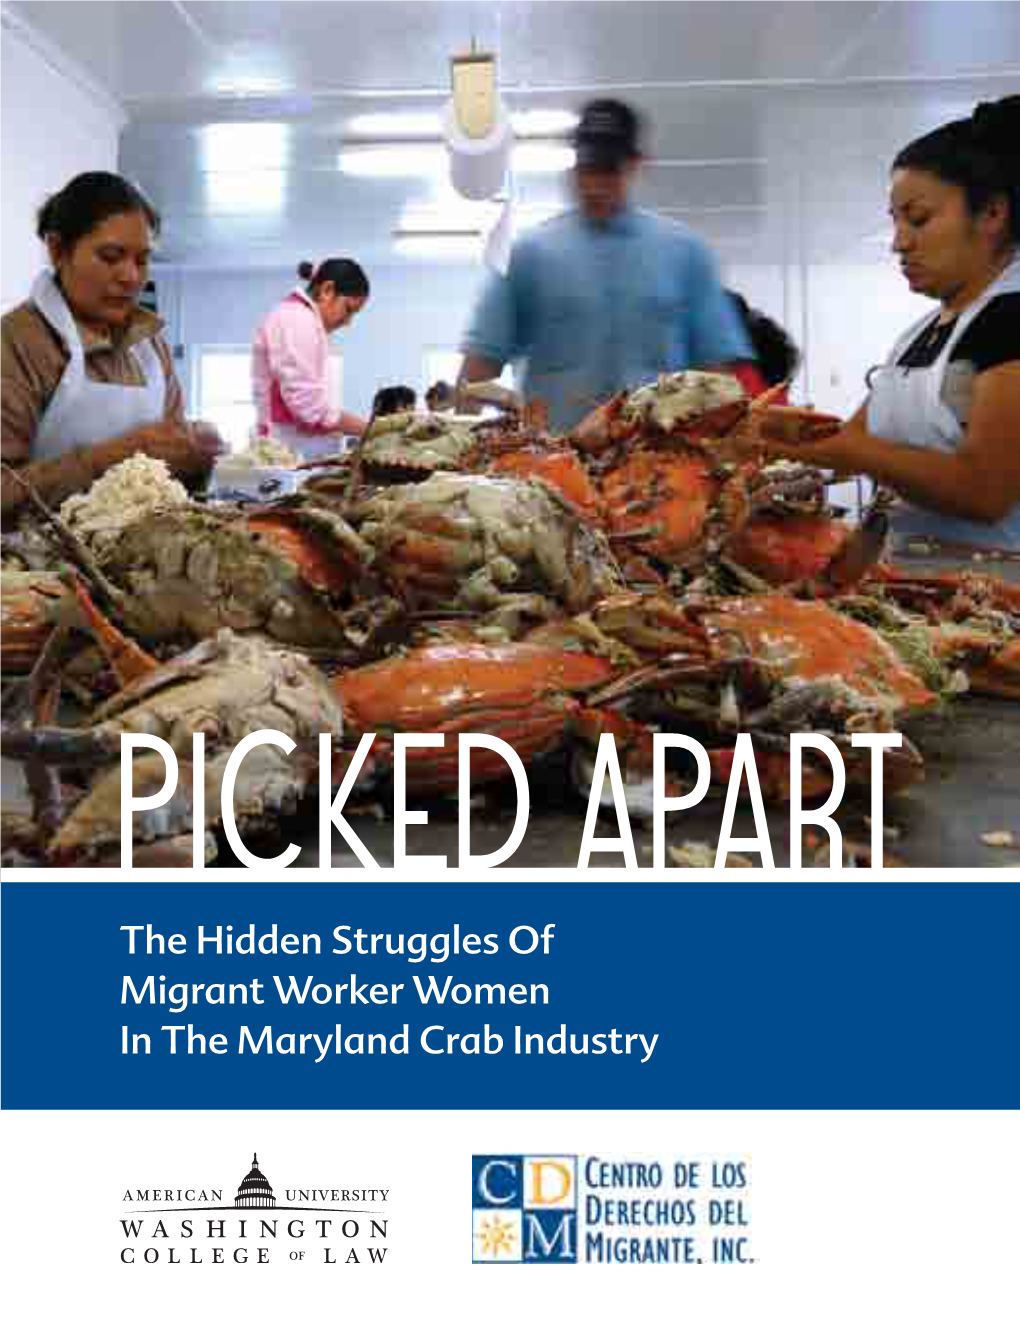 Picked Apart: the Hidden Struggles of Migrant Worker Women in The